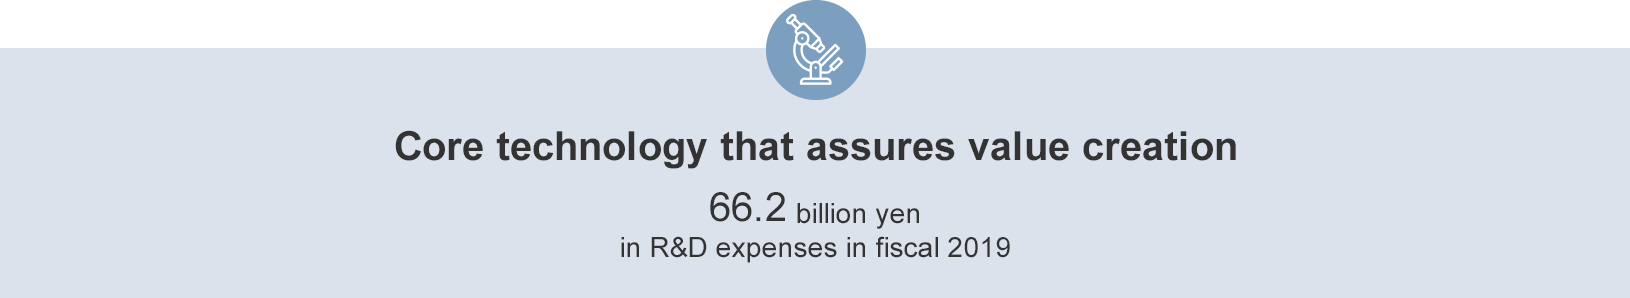 Core technology that assures value creation 66.2 billion yen in R&D expenses in fiscal 2019